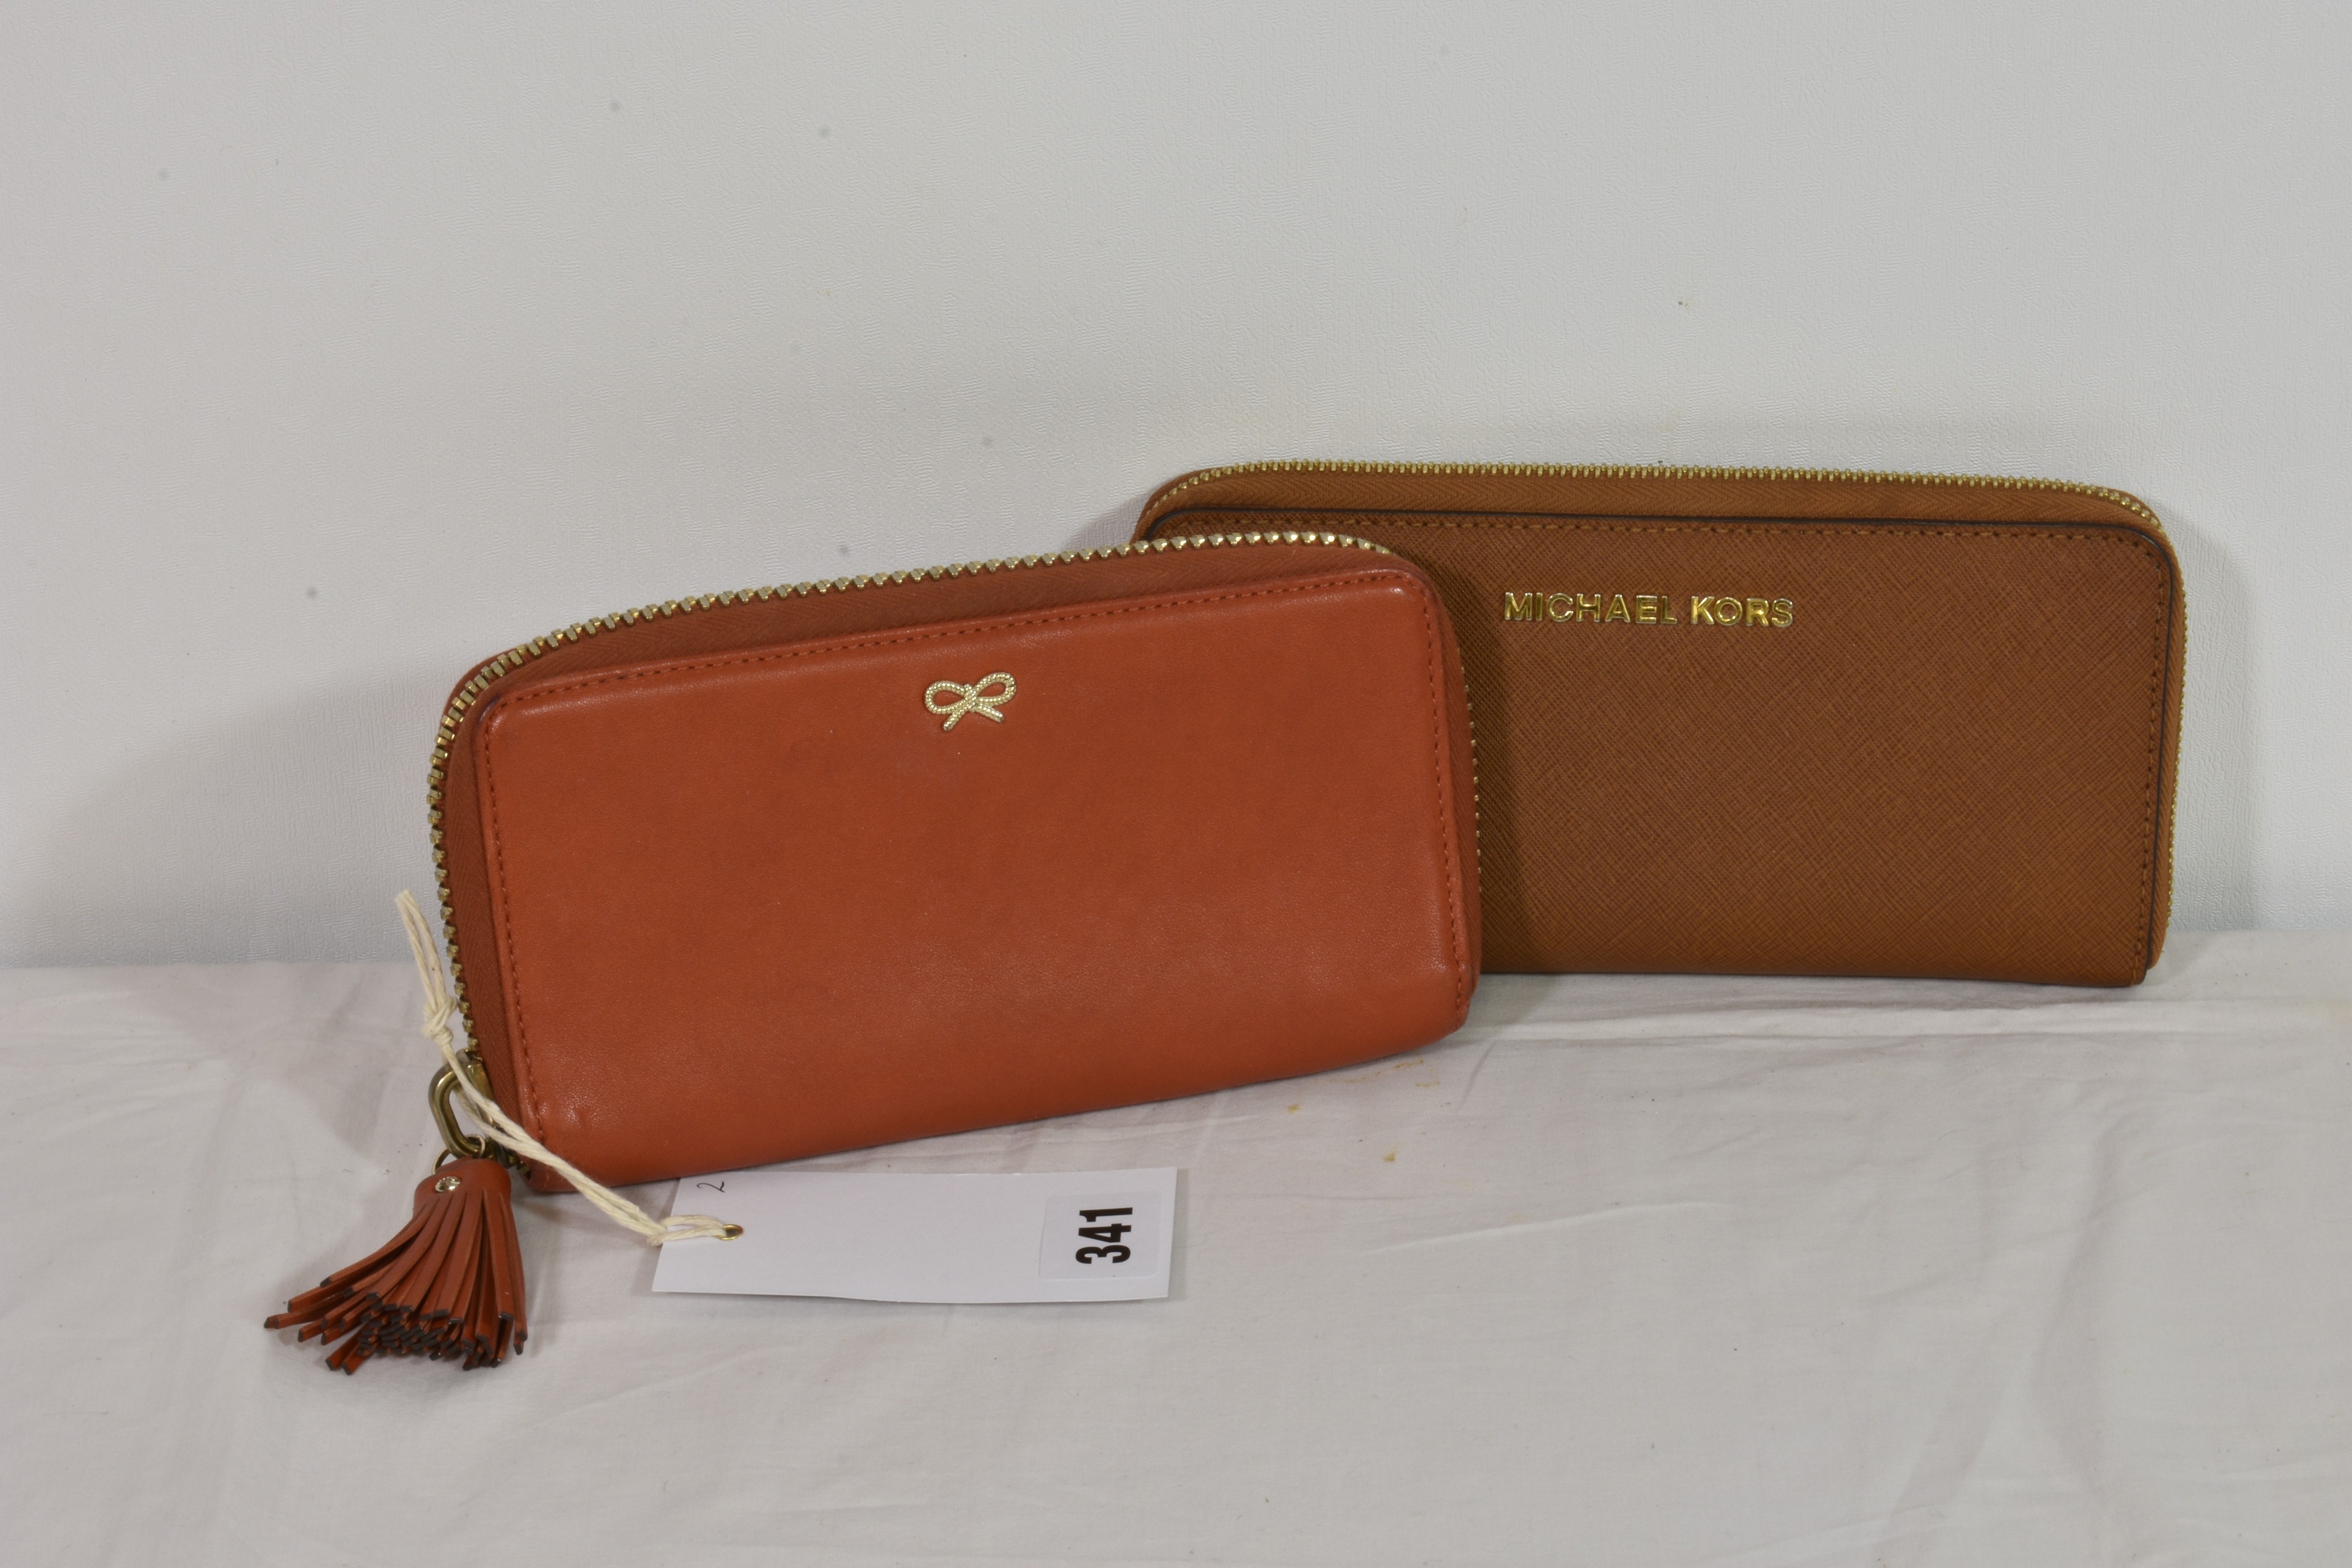 An Anya Hindmarch burnt orange leather purse with tassel zip together with a tan Michael Kors